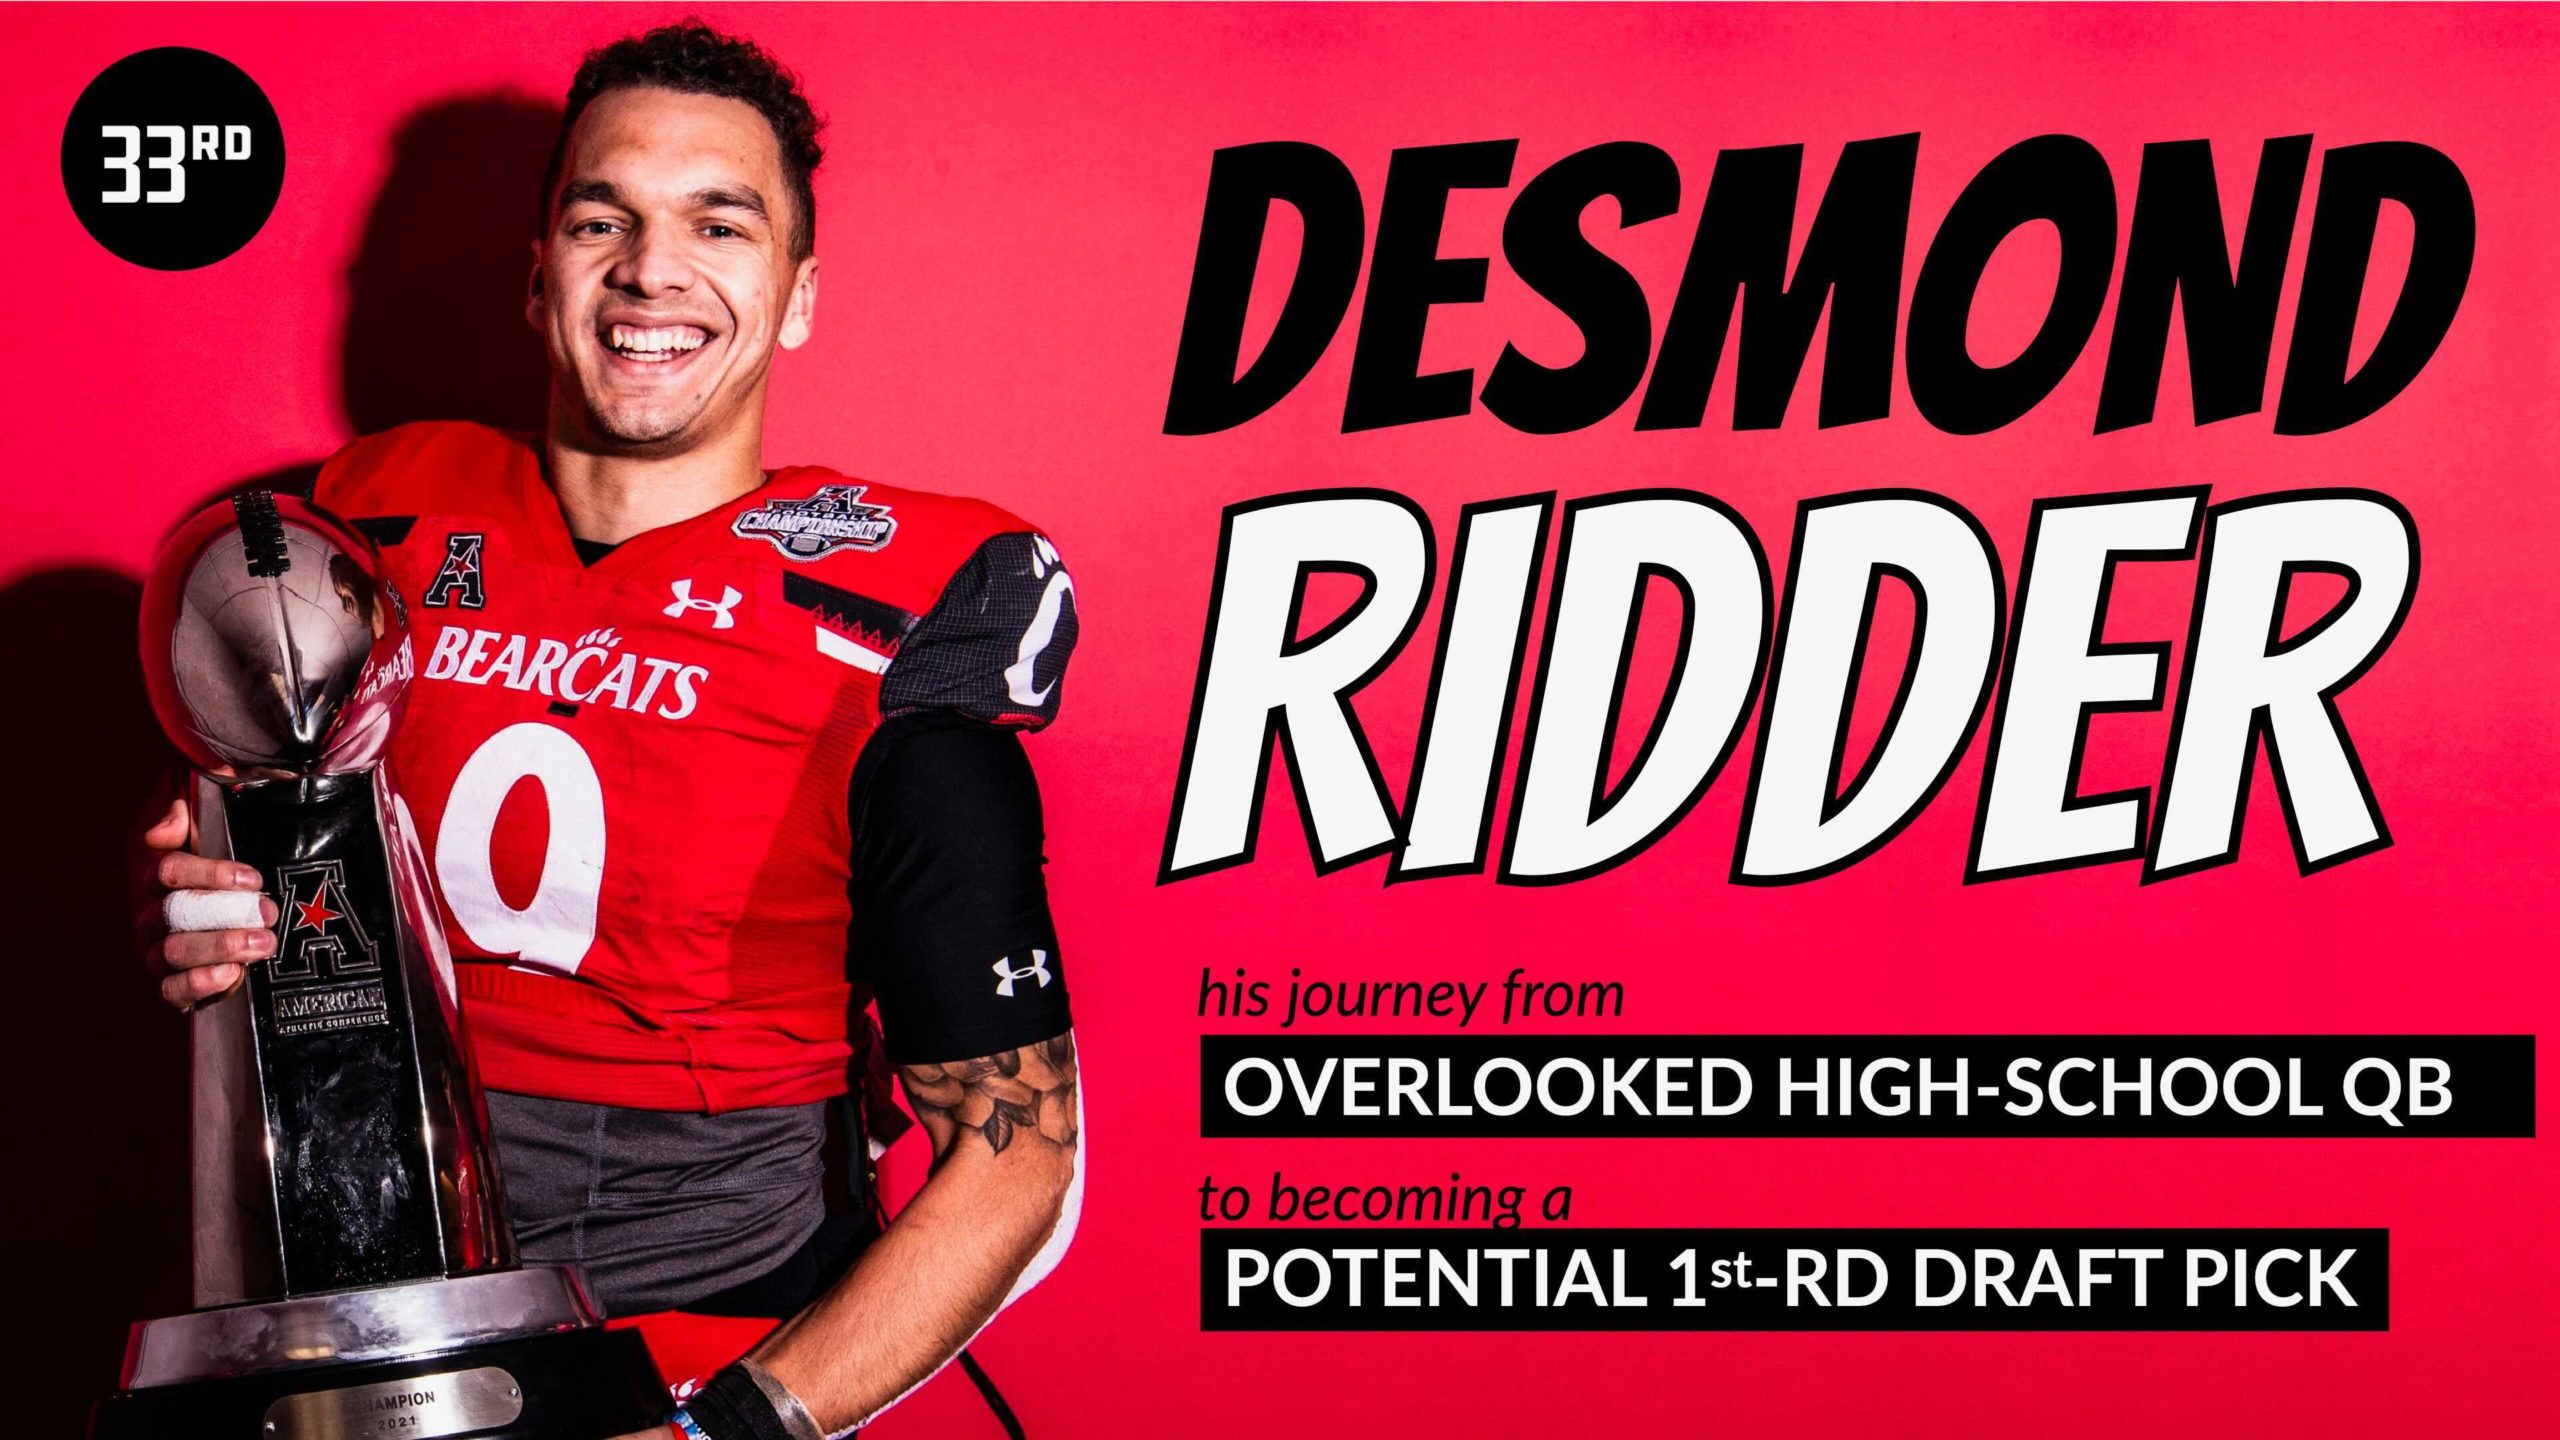 Desmond Ridder on His Journey From Overlooked College Prospect To Potential 1st-Round Pick